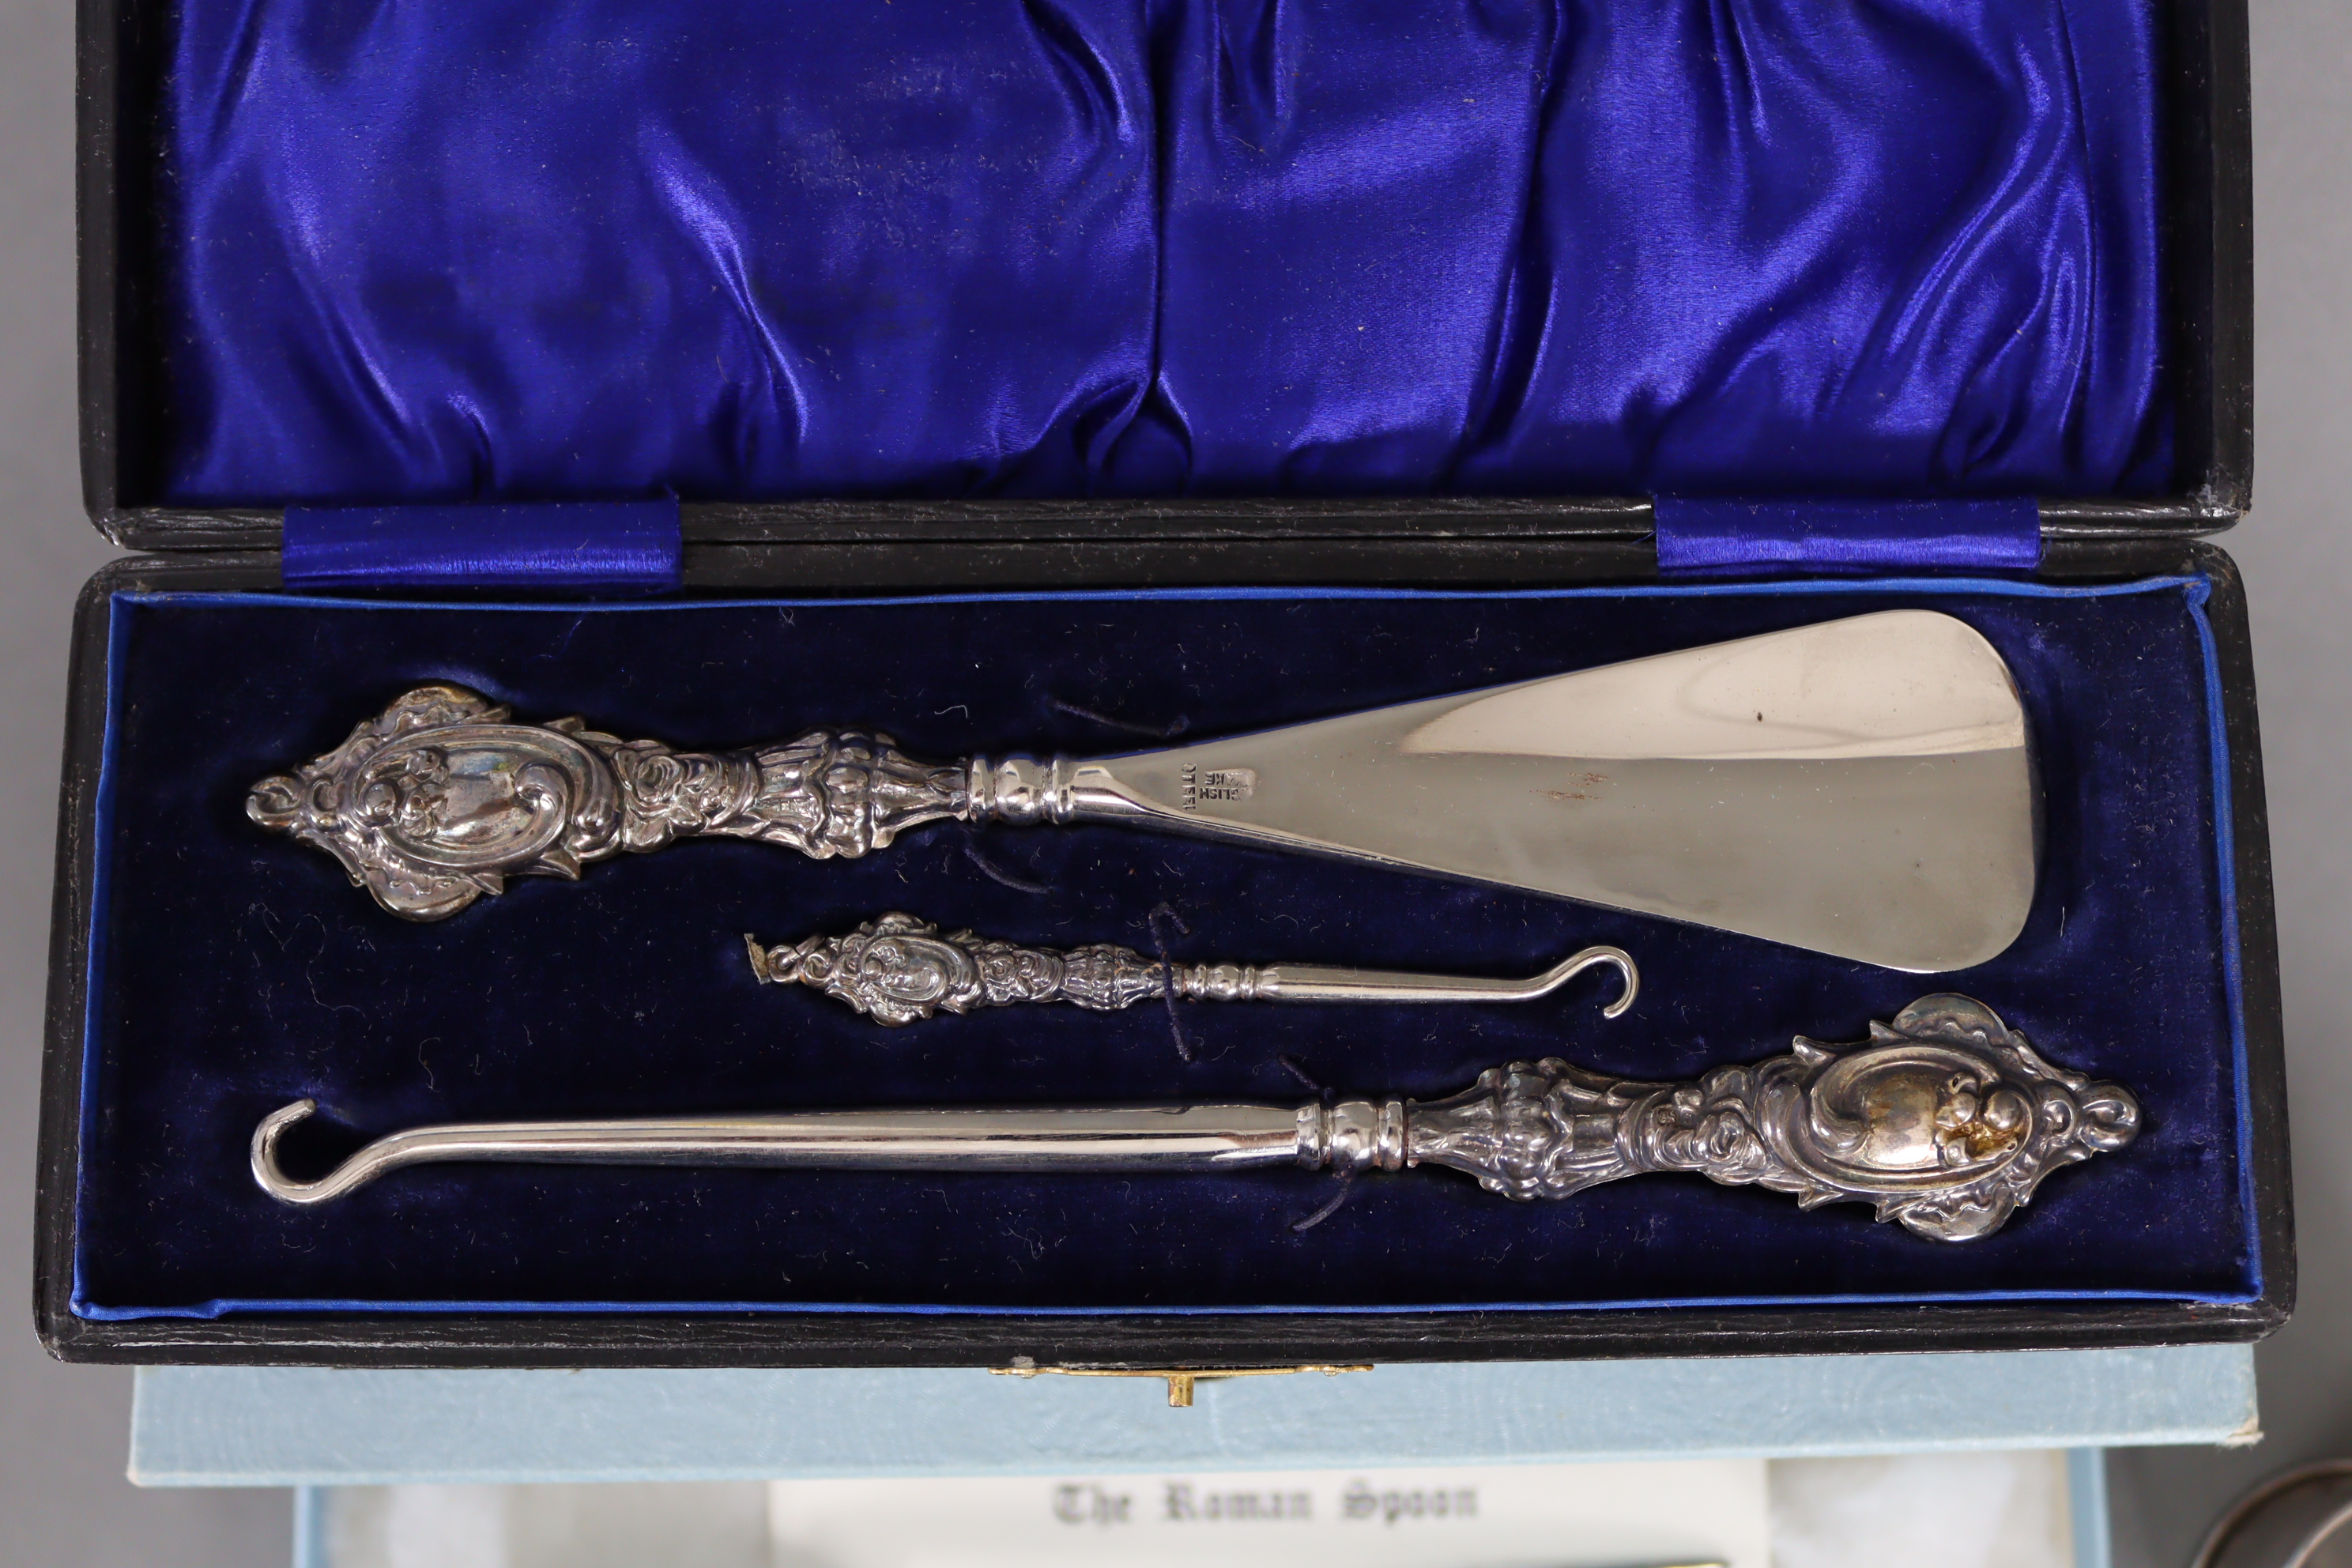 Two Roman-style spoons by E. P. Mallory & Son Ltd, Sheffield 1978 & 9, 0.63 & 0.67 oz, with original - Image 6 of 6